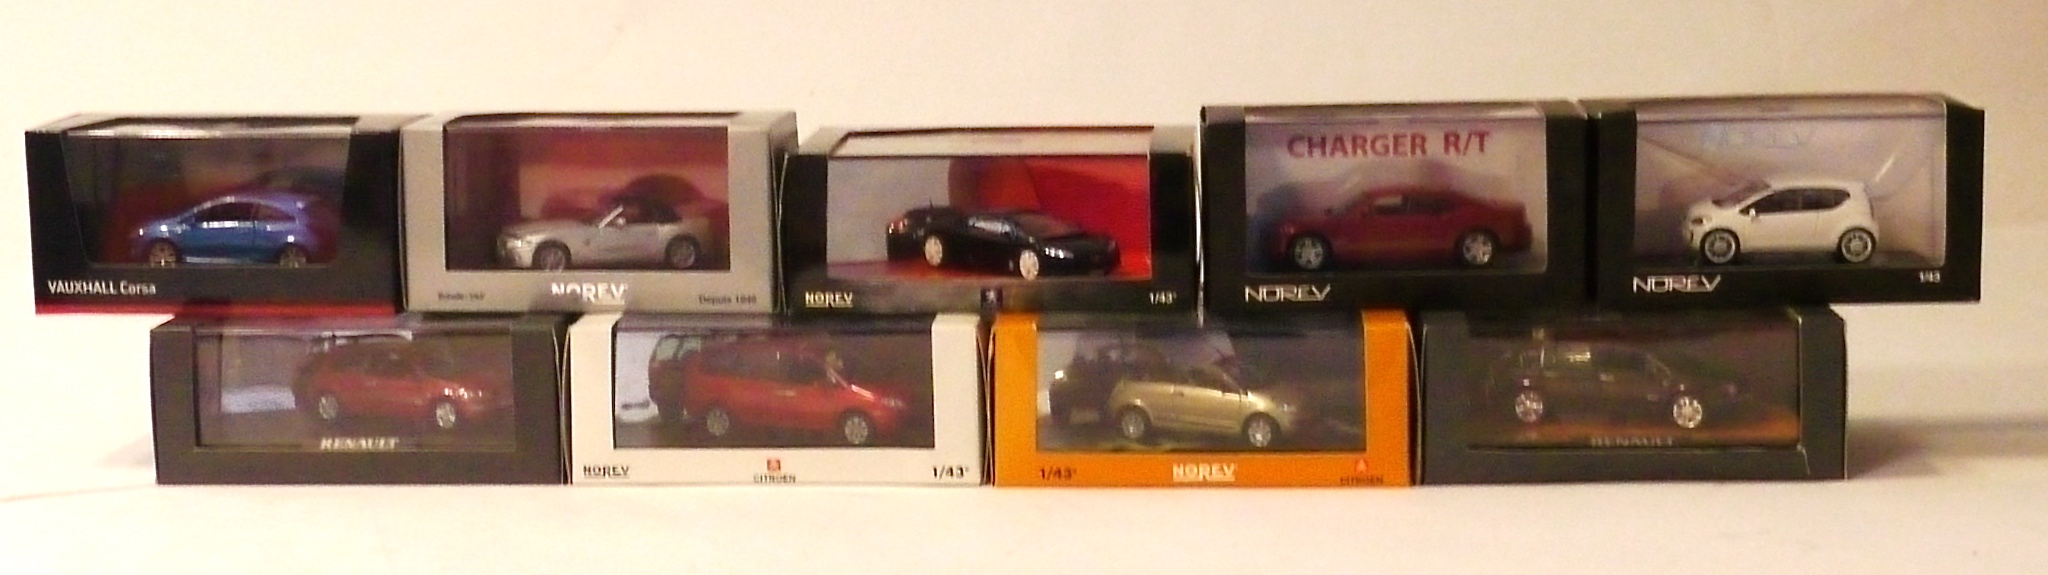 Norev, including a Volkswagen Up! And a Renault Vel Satis, together with similar models by other